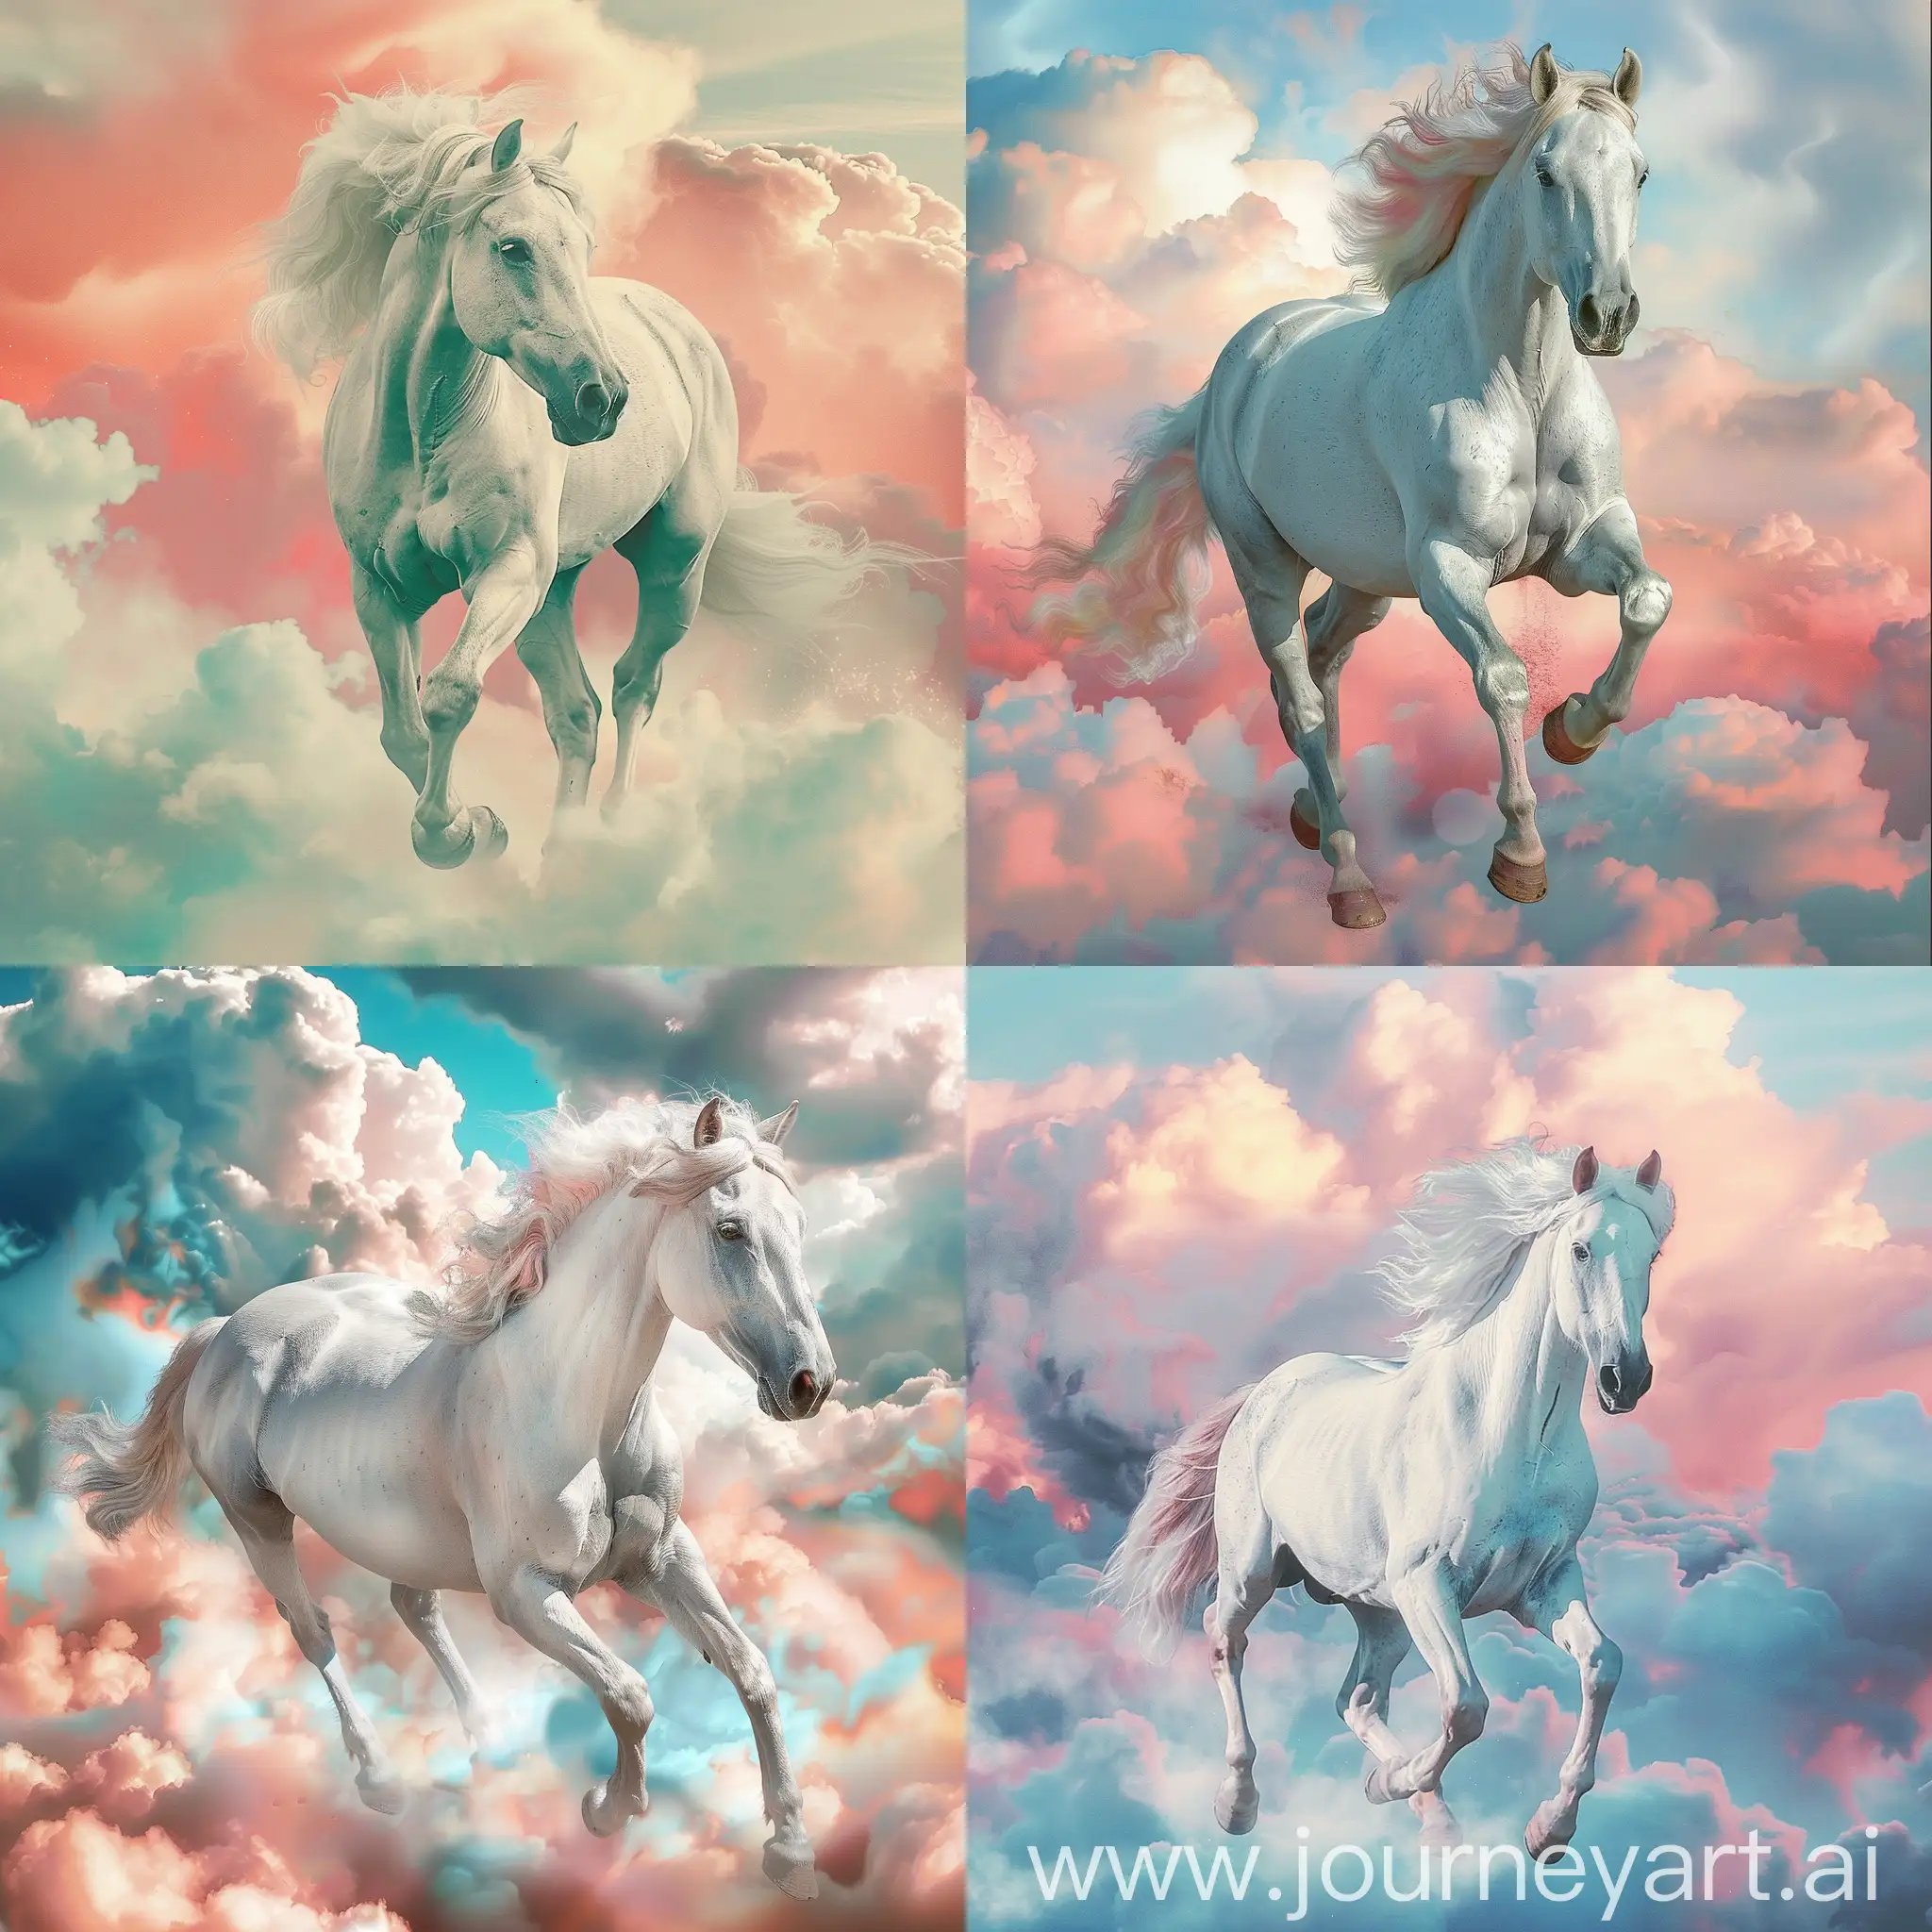 Graceful-White-Horse-Trotting-on-Pastel-Clouds-in-Emotional-Space